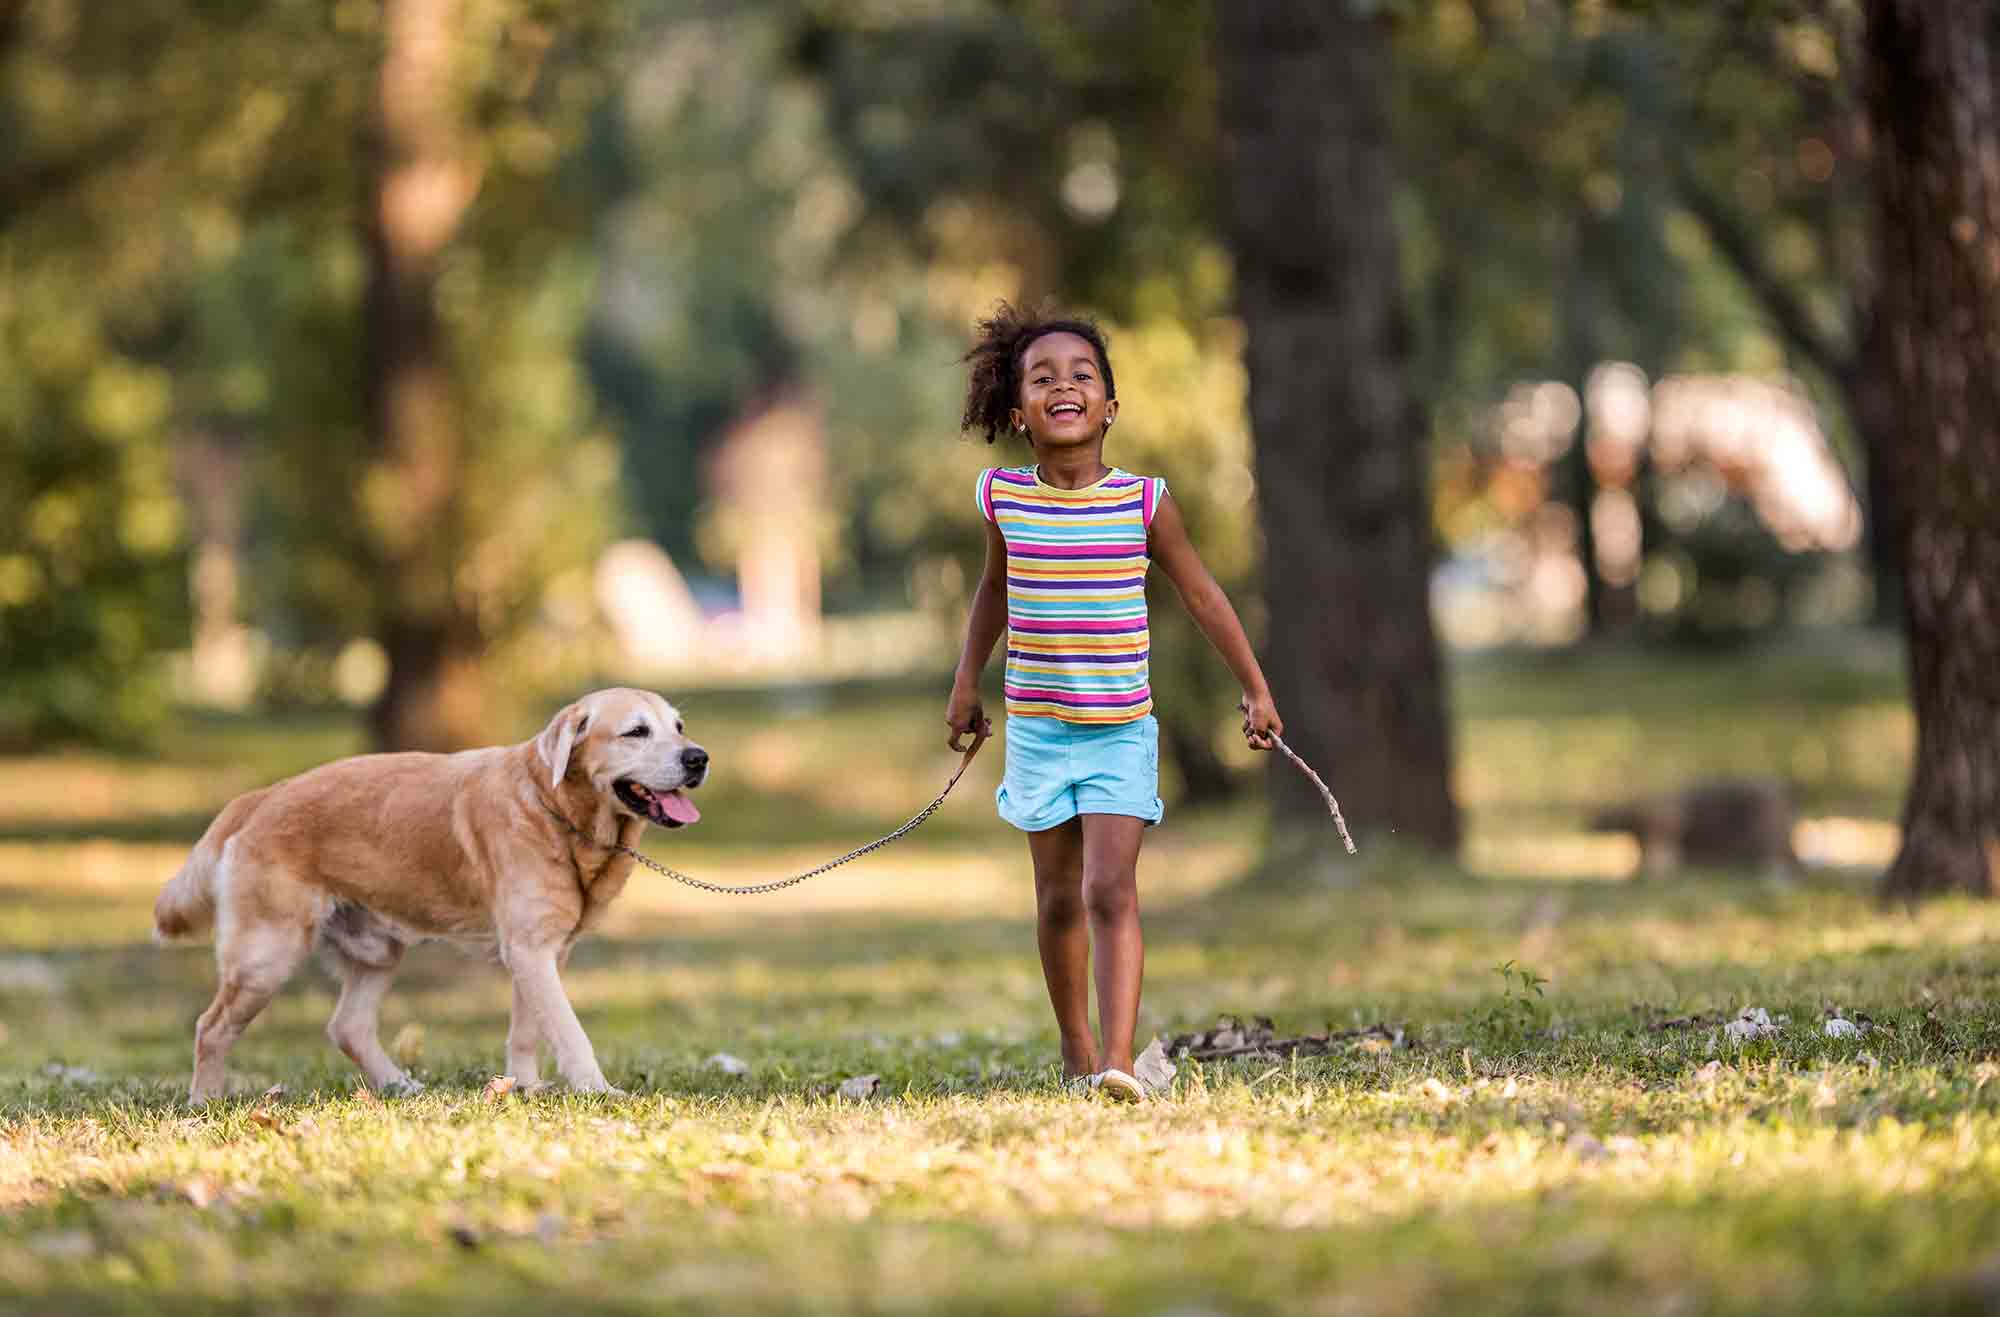 Kids and Pet Care: Taking Responsibility for the Family Pet